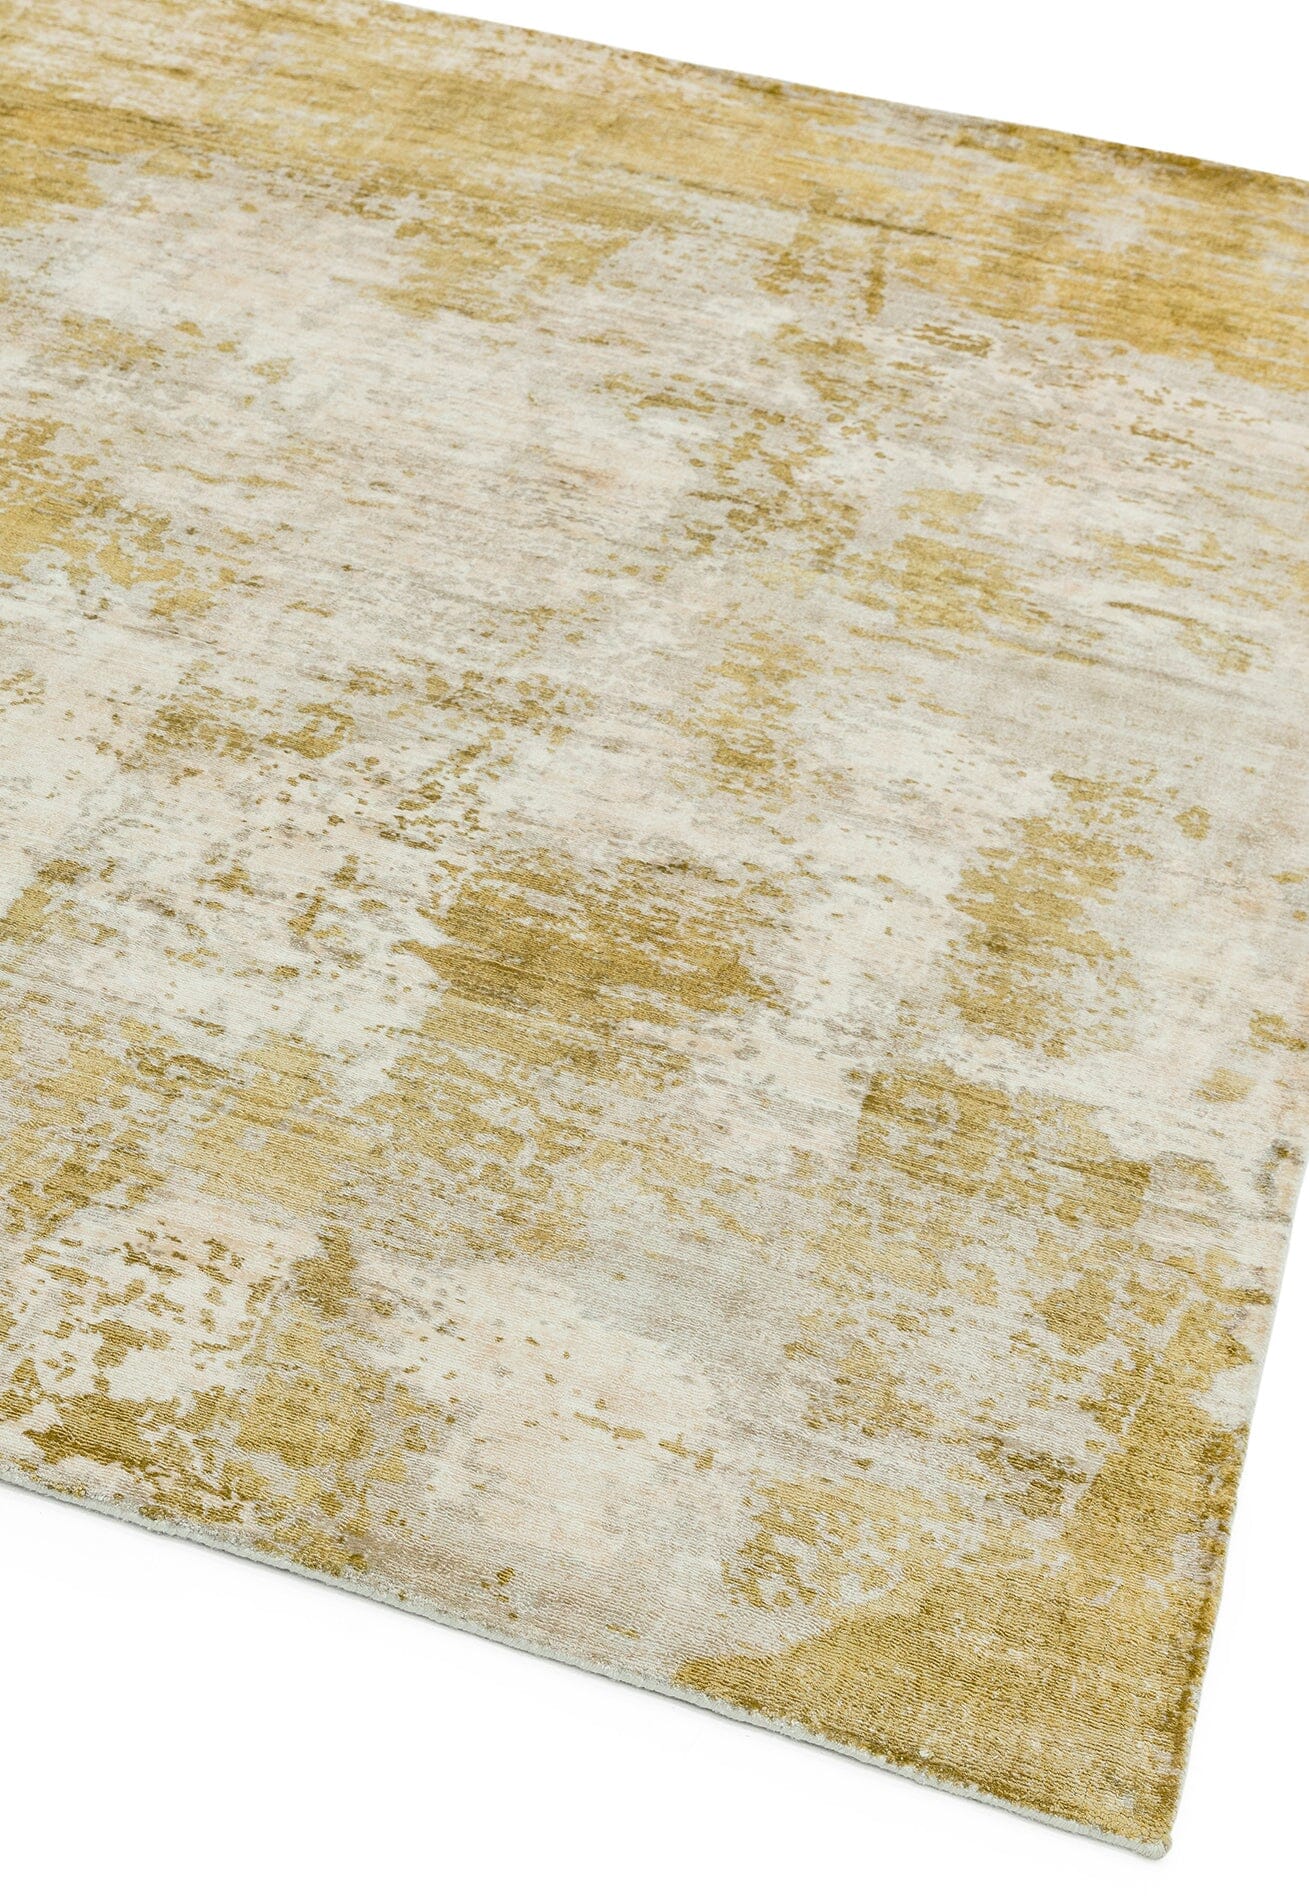  Asiatic Carpets-Asiatic Carpets Gatsby Hand Woven Rug Autumn - 160 x 230cm-Yellow, Gold 765 